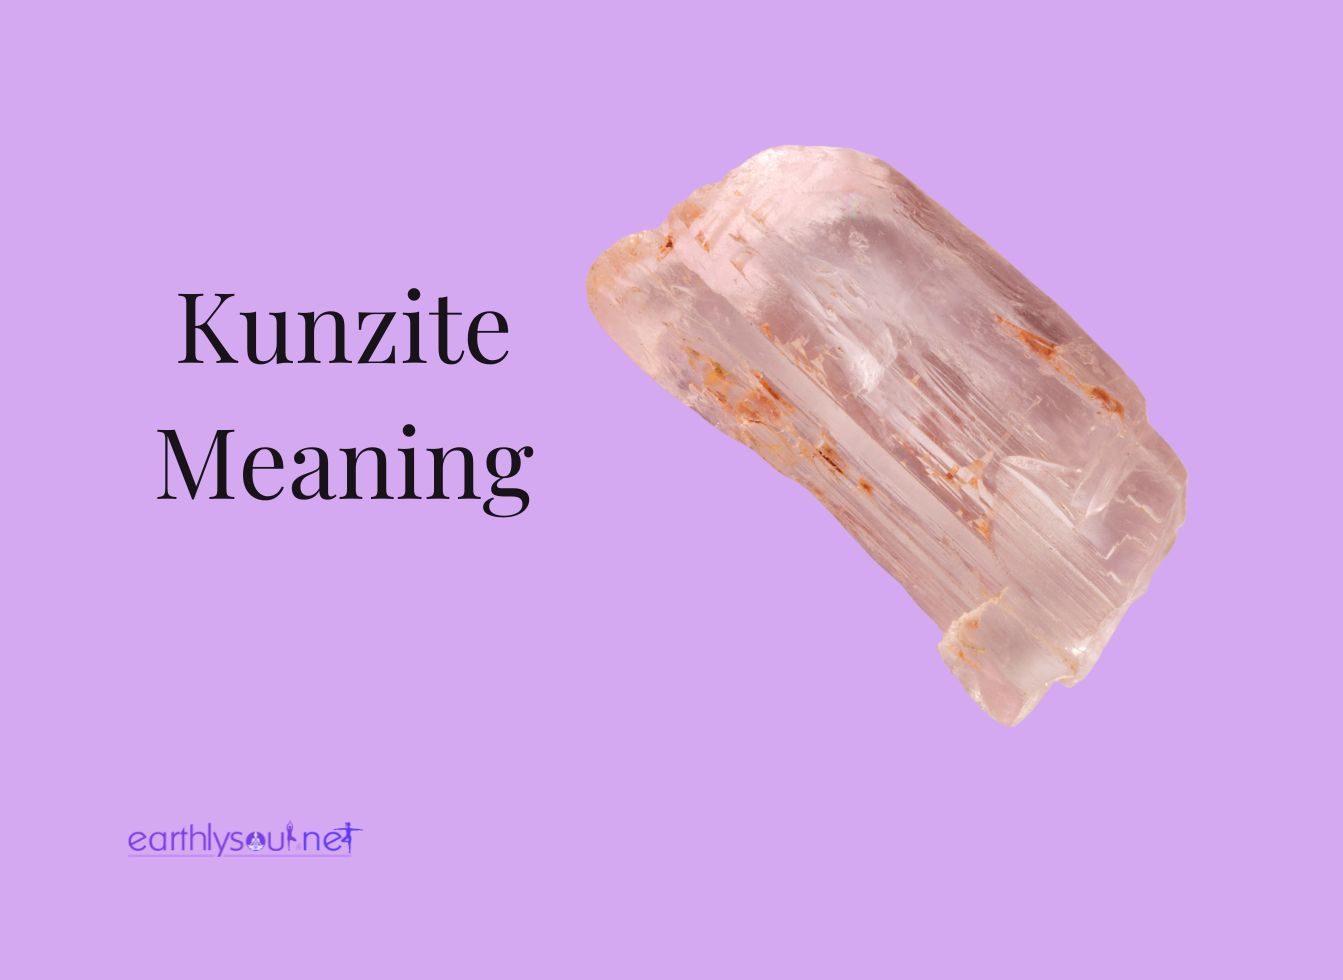 Kunzite meaning featured image